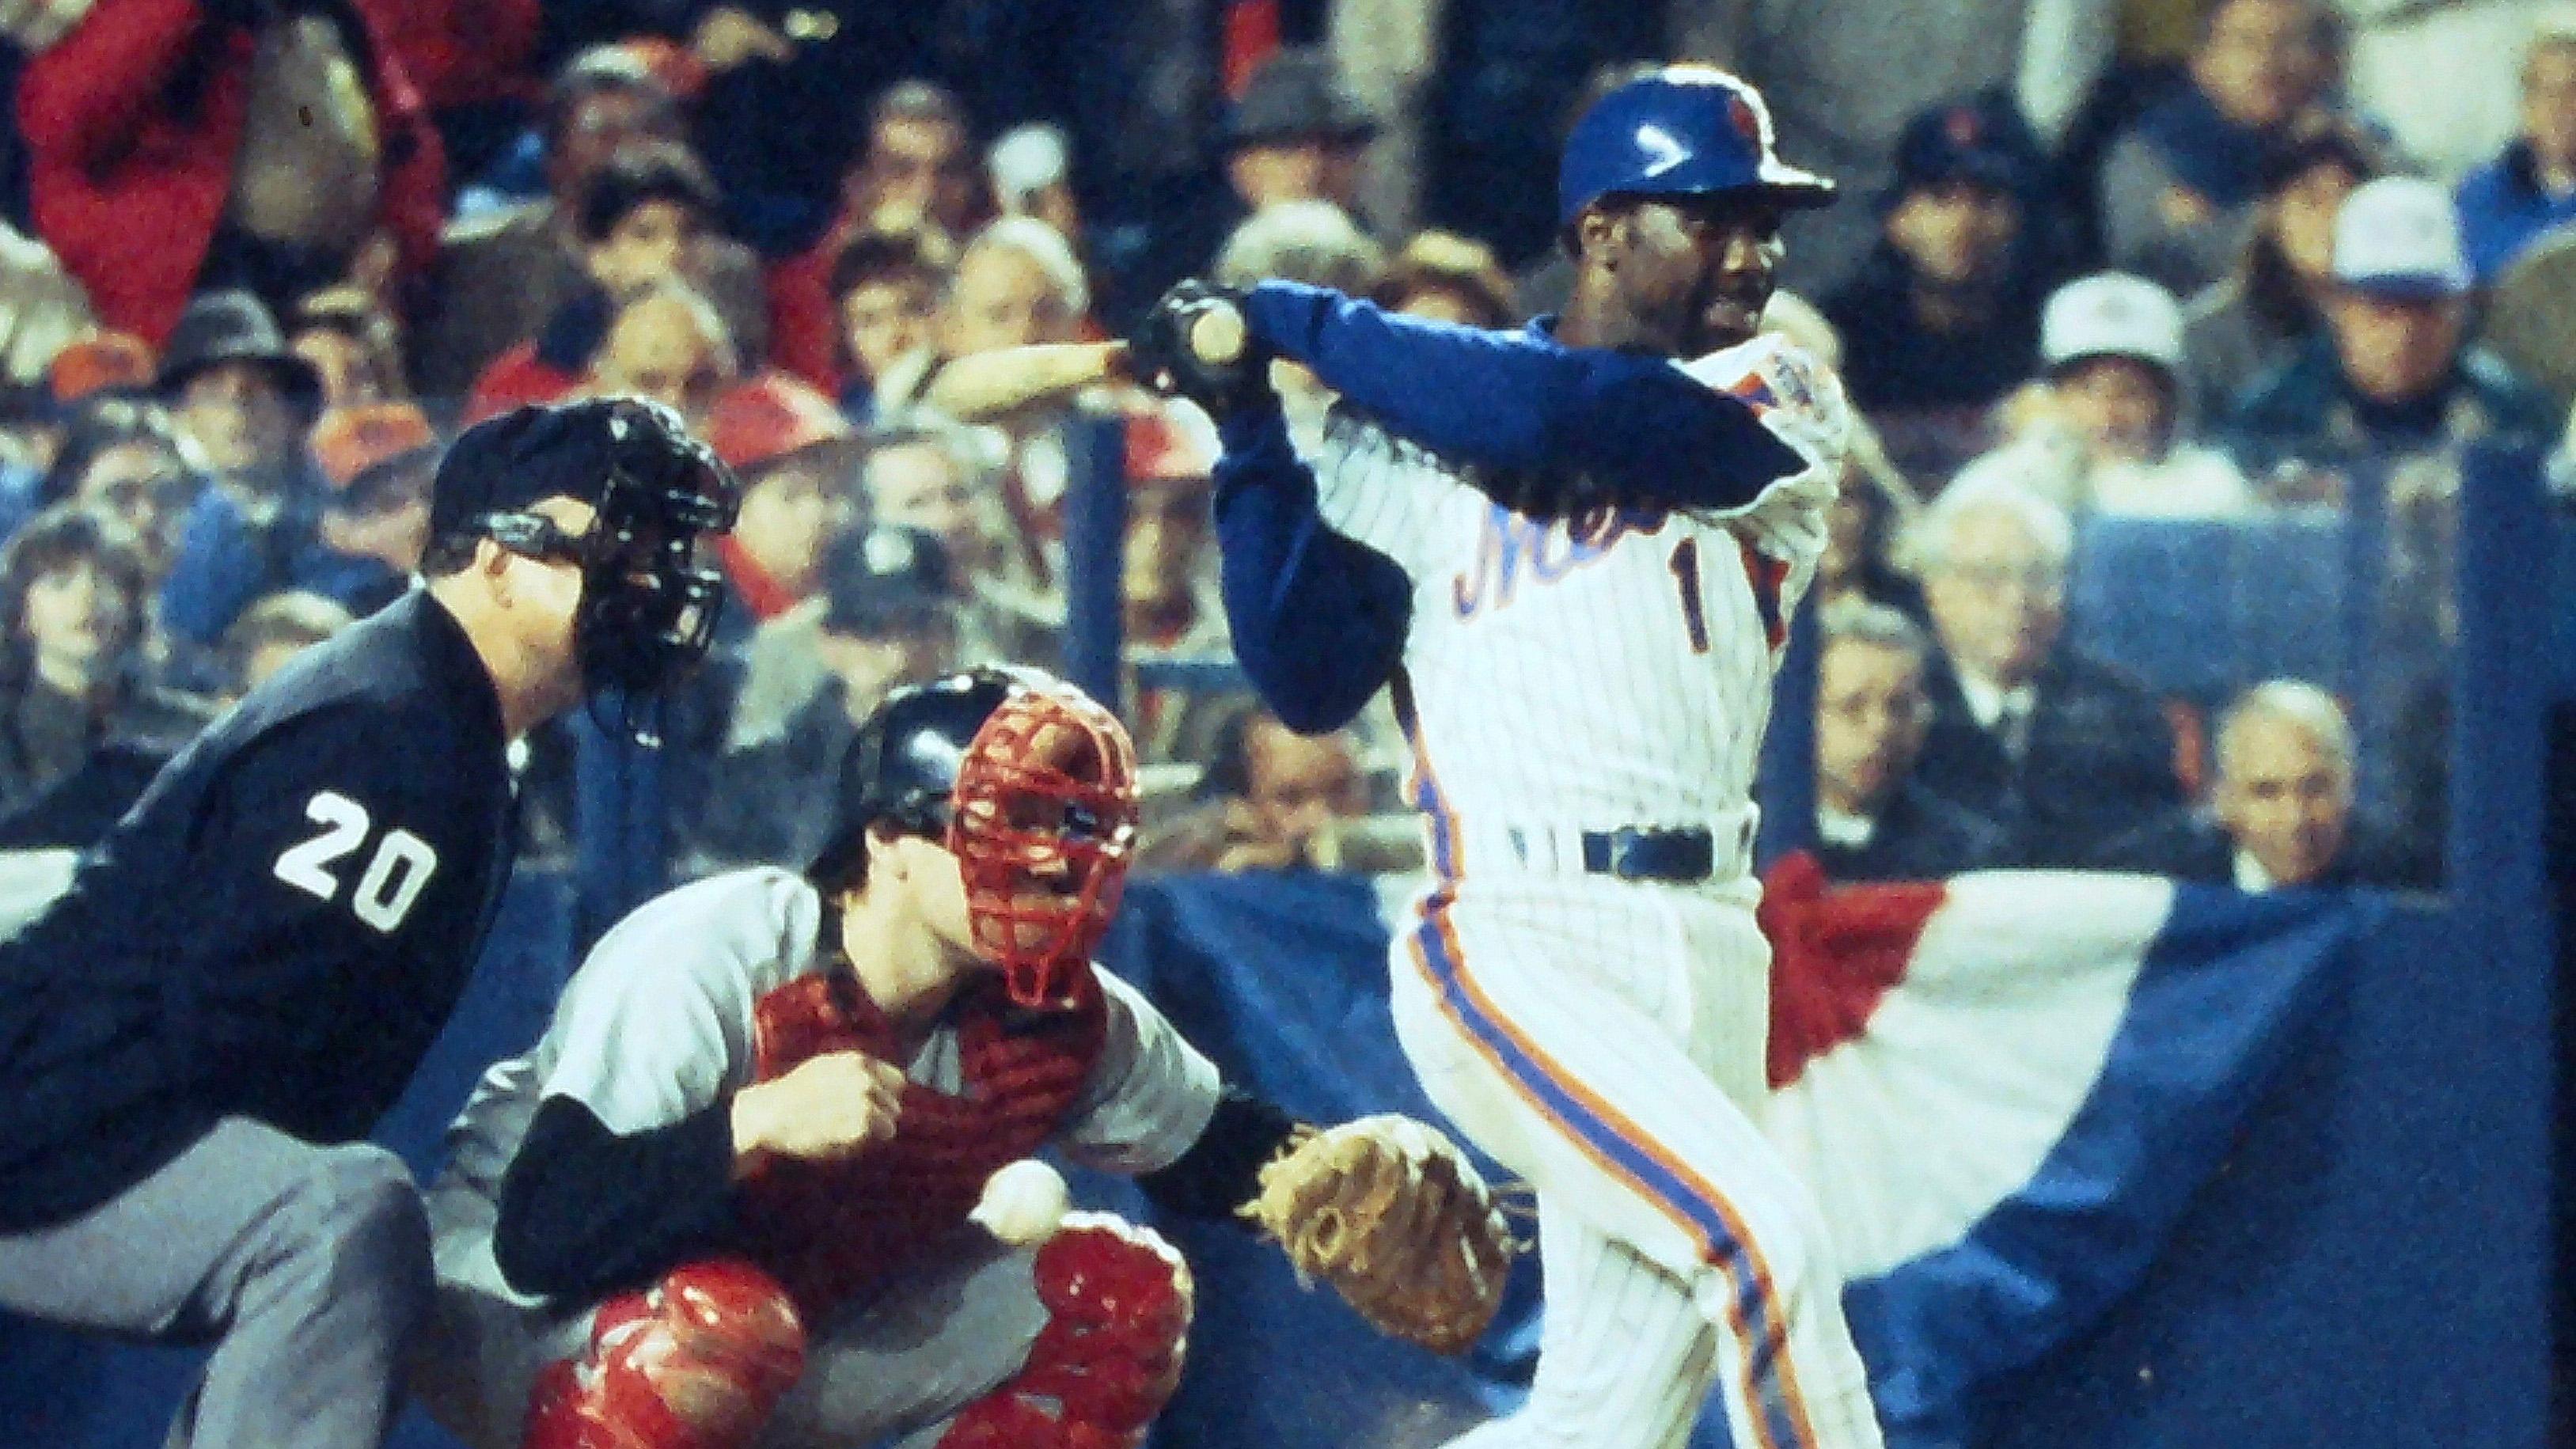 Mets' Mookie Wilson hits a slow grounder up the first base line that gets by Red Sox first basemen Bill Buckner scoring Ray Knight from second to give the Mets the walk off victory in the bottom of the 10th inning during Game 6 of the World Series at Shea Stadium Oct. 25, 1986. / © Frank Becerra Jr/USA TODAY / USA TODAY NETWORK